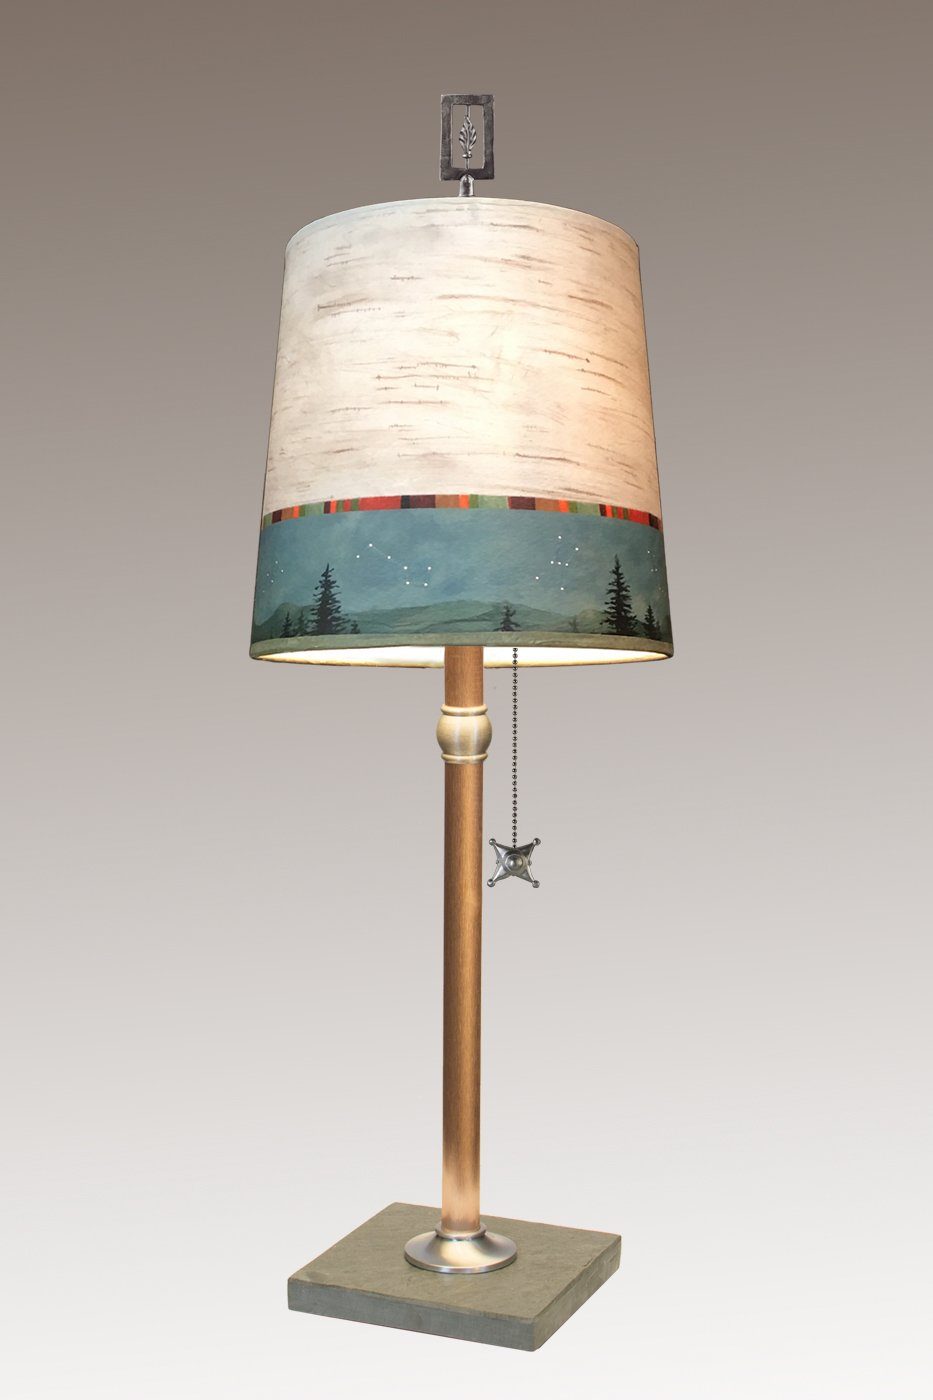 Janna Ugone & Co Table Lamps Copper Table Lamp with Medium Drum Shade in Birch Midnight